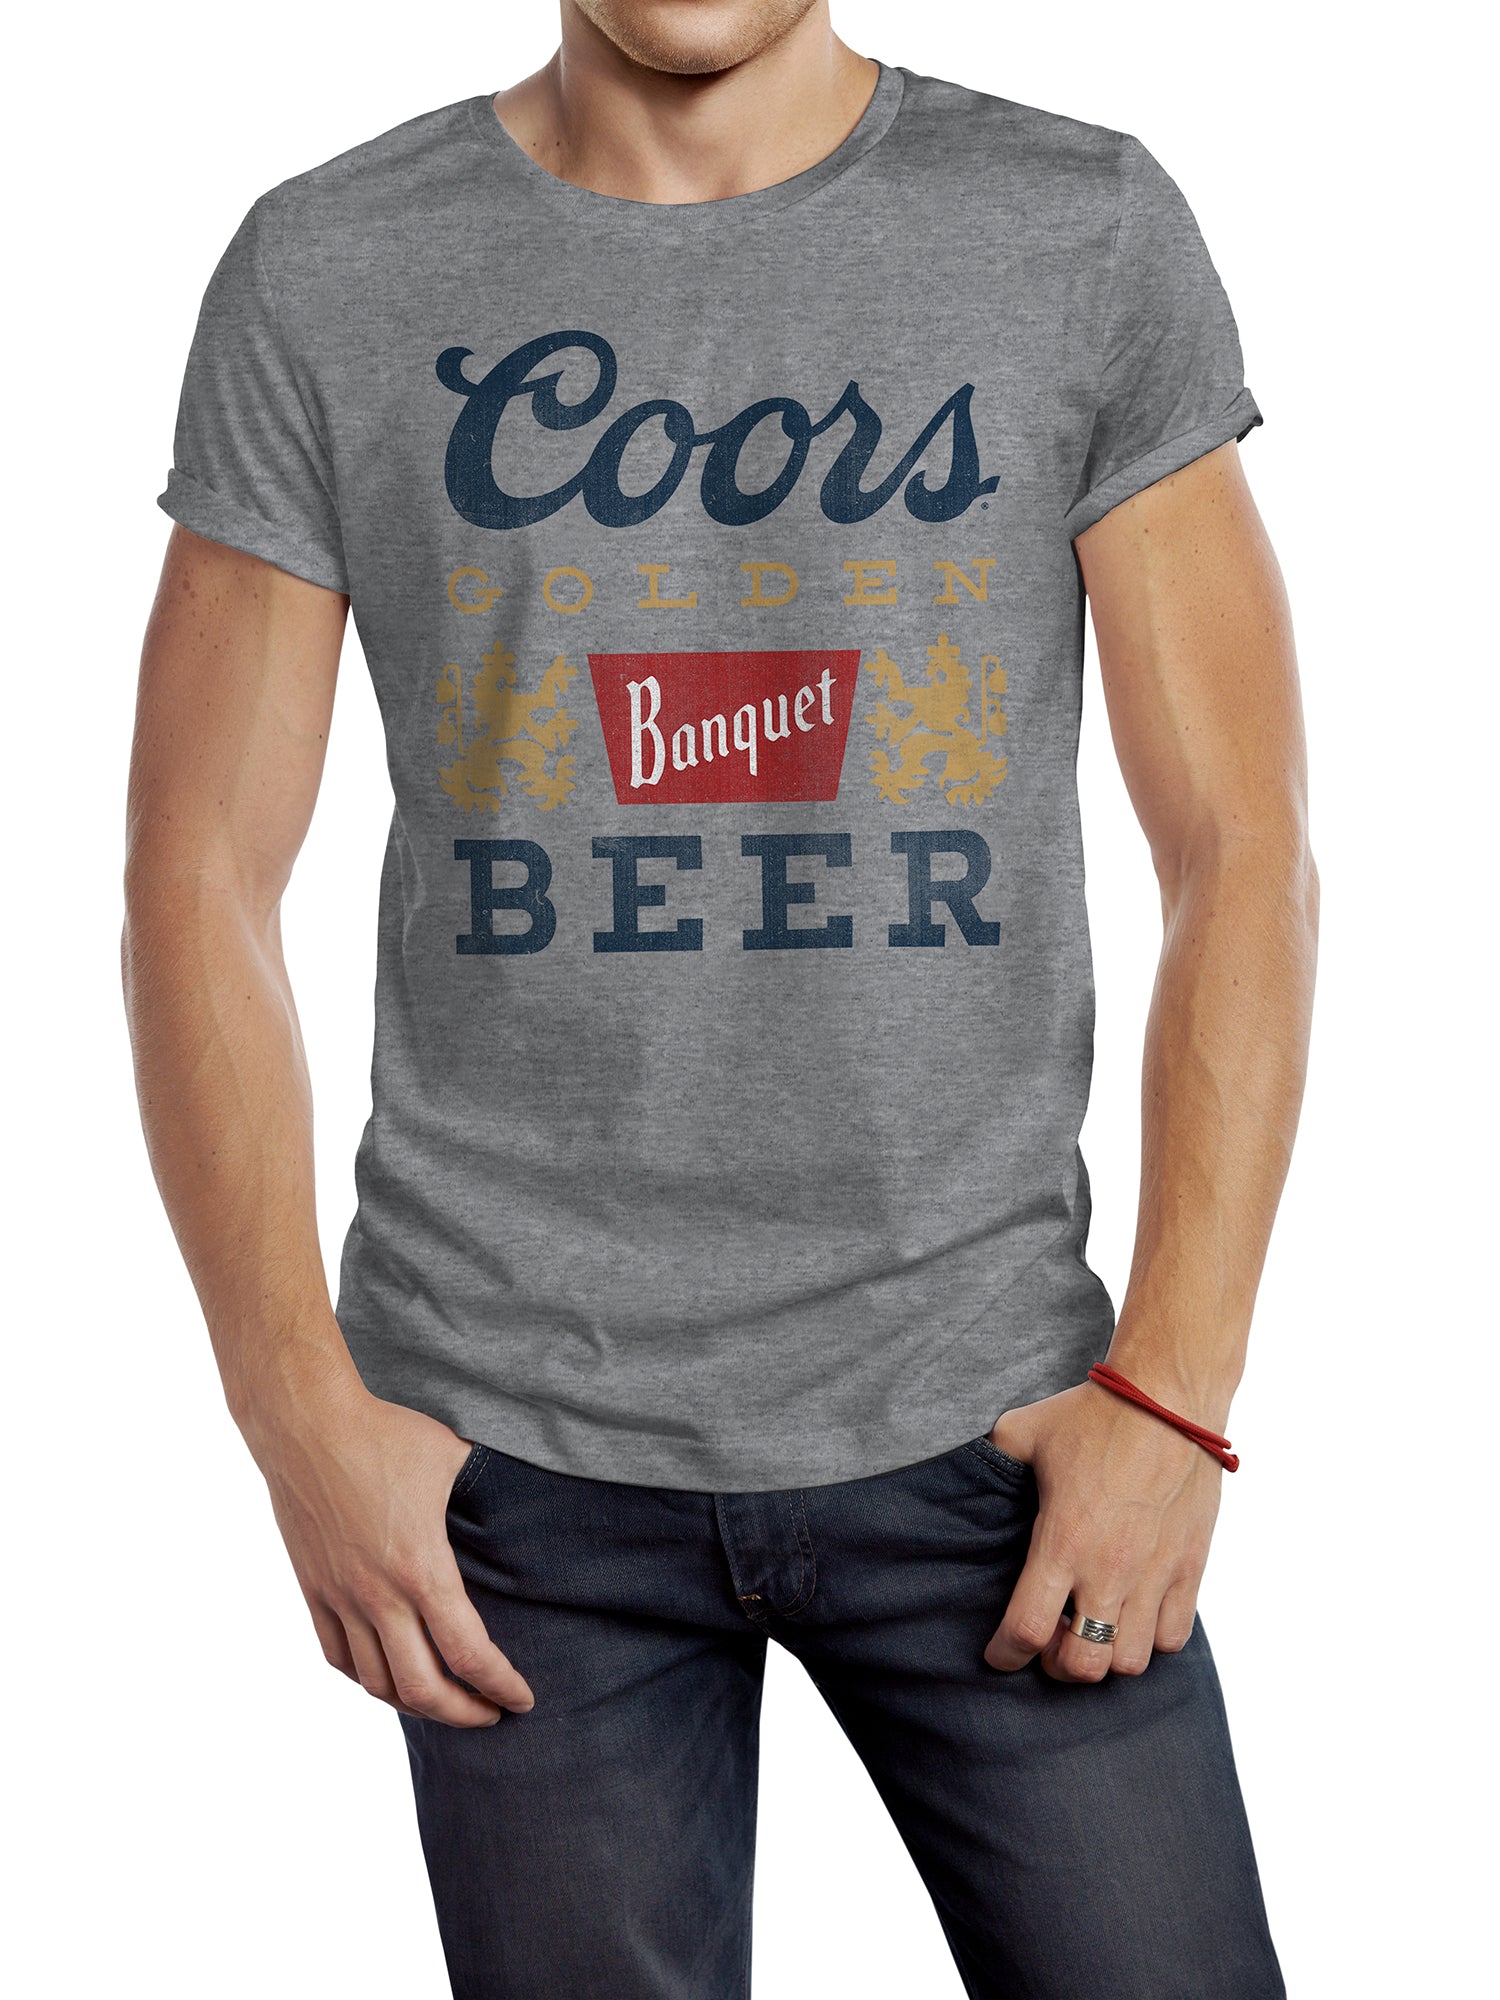 Tee Luv Coors Light Cold As The Rockies T-Shirt - Grey XX-Large, Men's